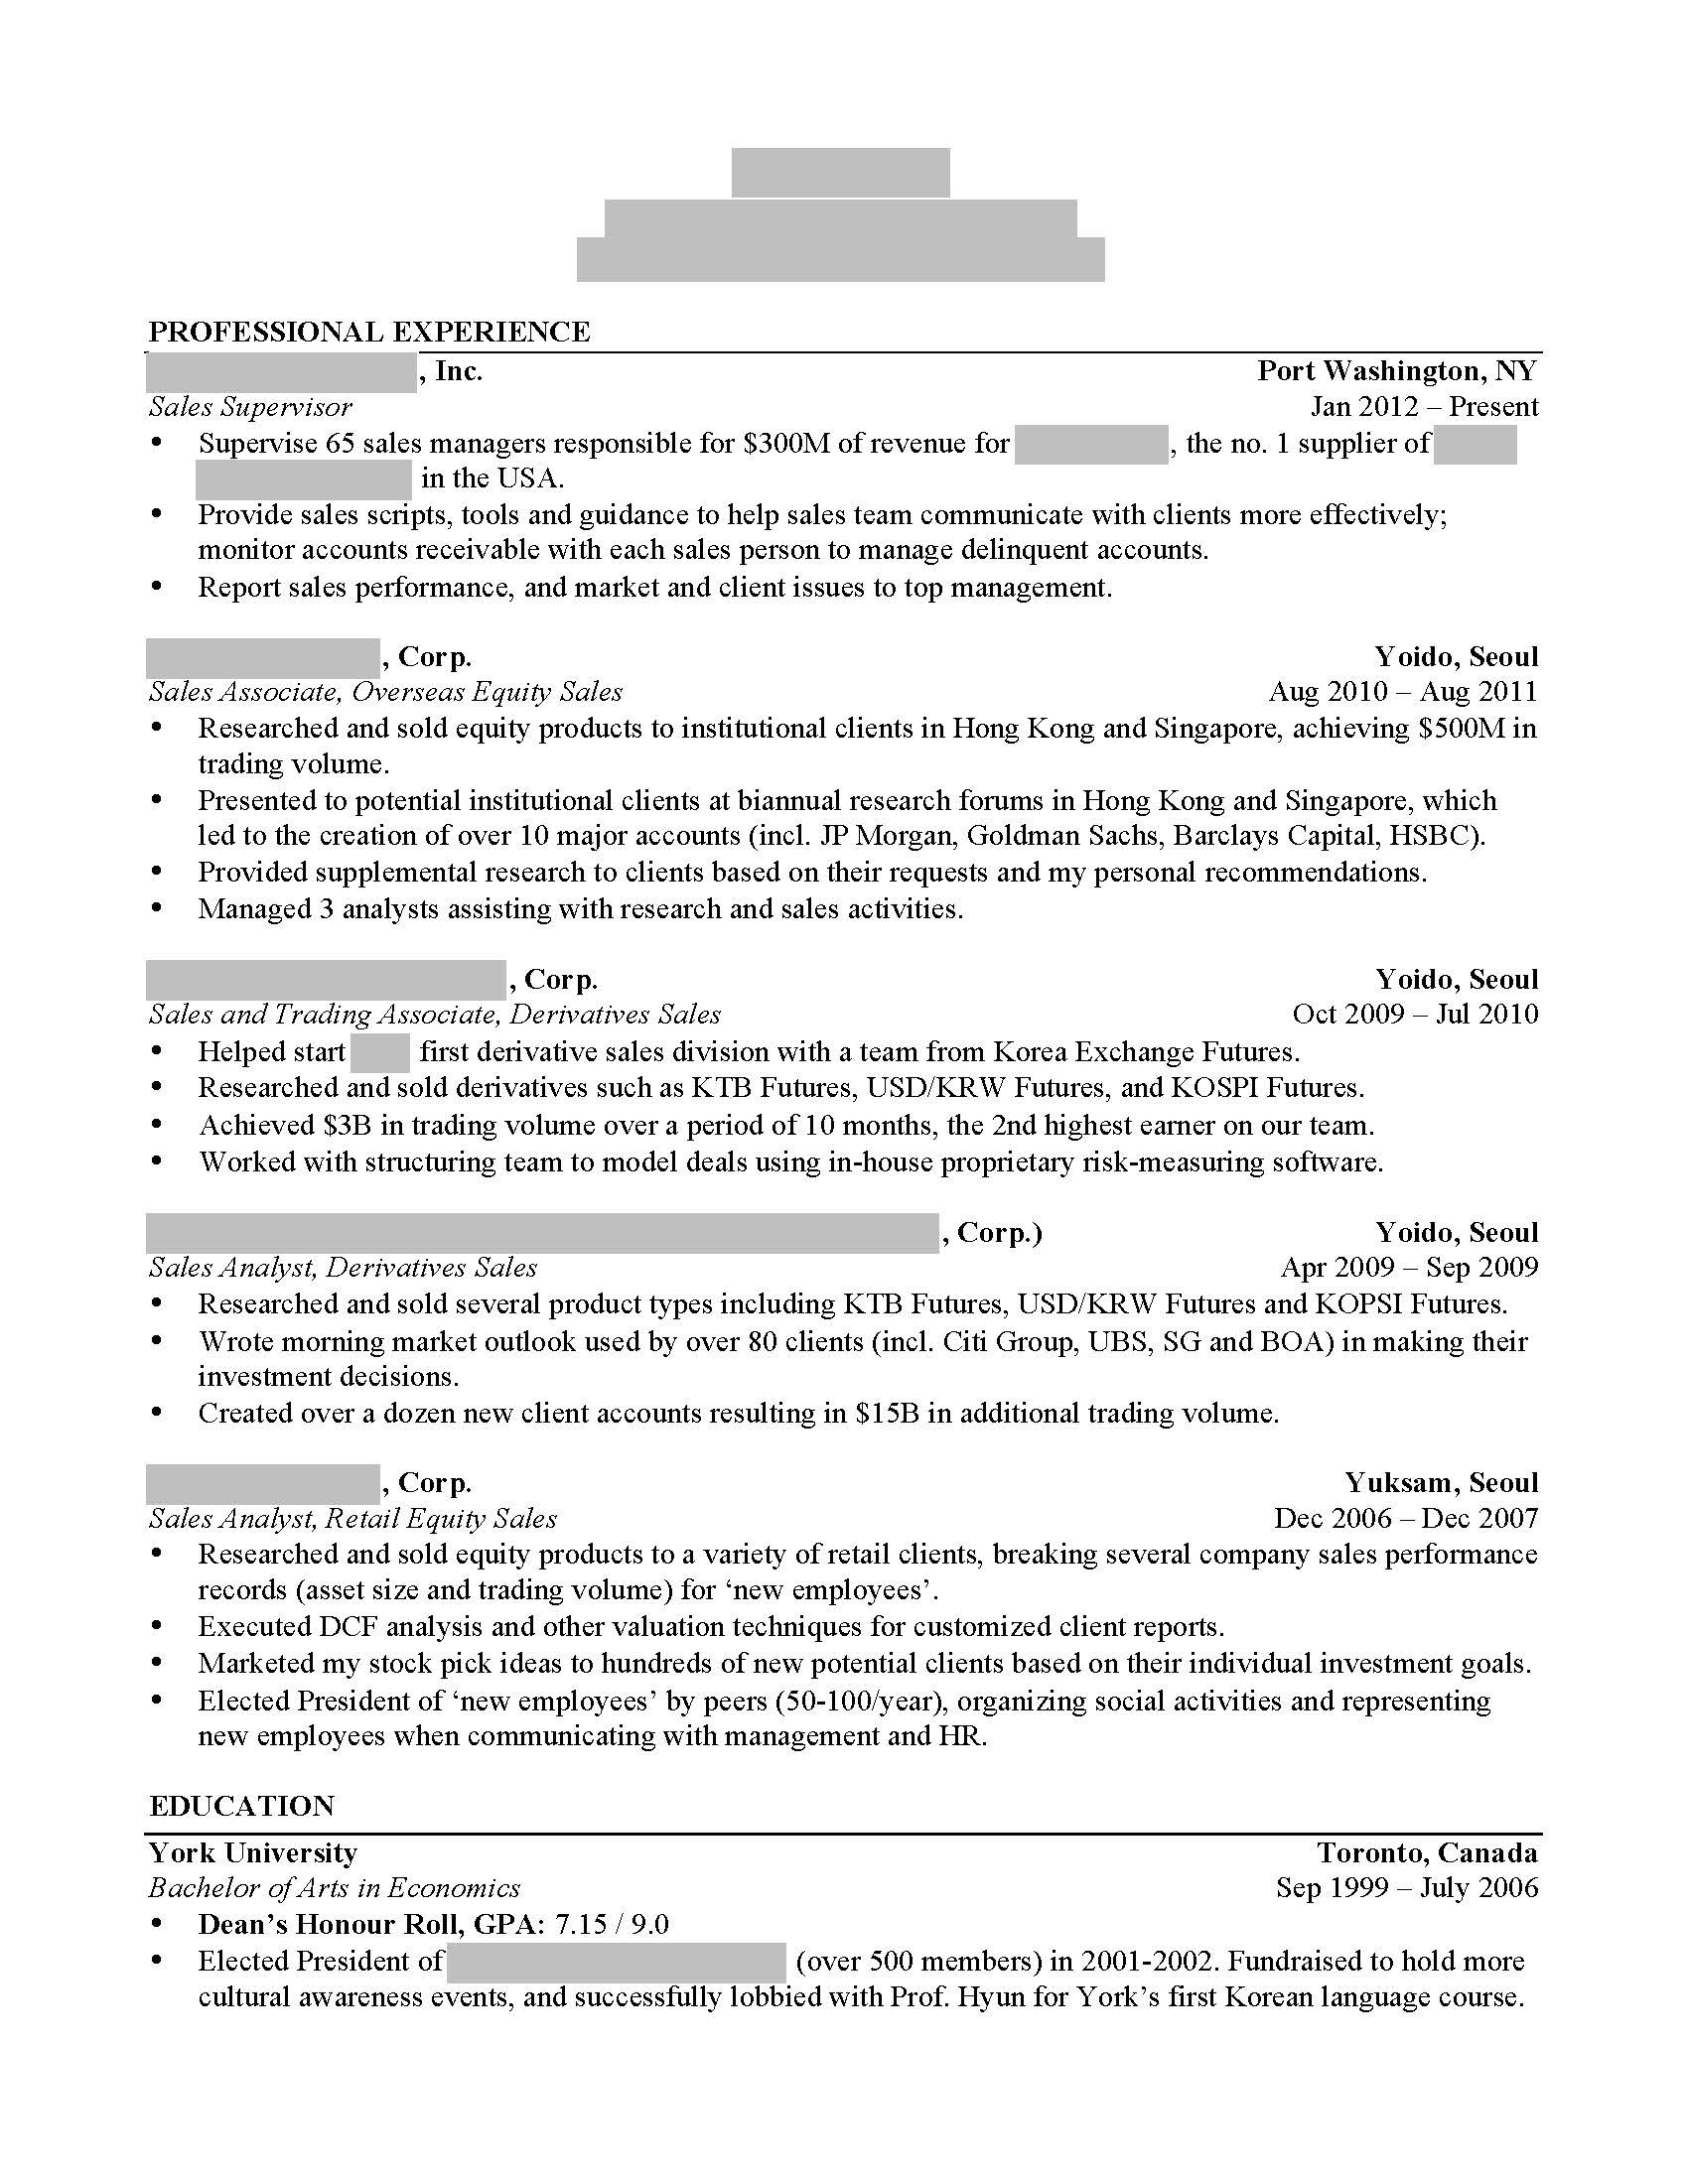 Foster School Of Business Resume Template 6: 7 Deadly Sins Of Mba Resumes – Â» touch Mba